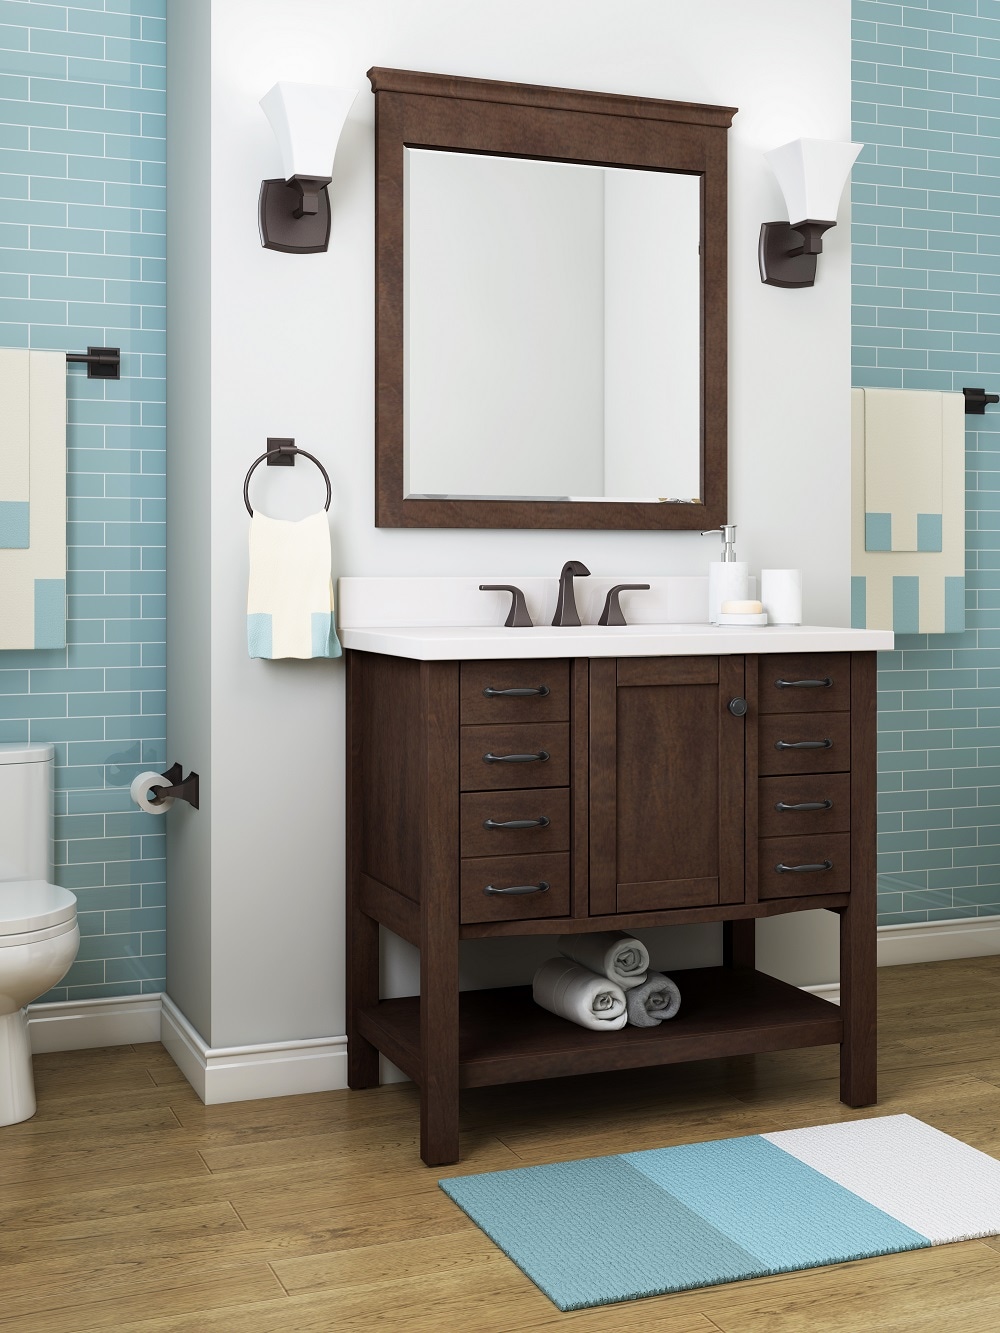 allen + roth Kingscote 36-in Espresso Undermount Single Sink Bathroom  Vanity with White Engineered Stone Top at